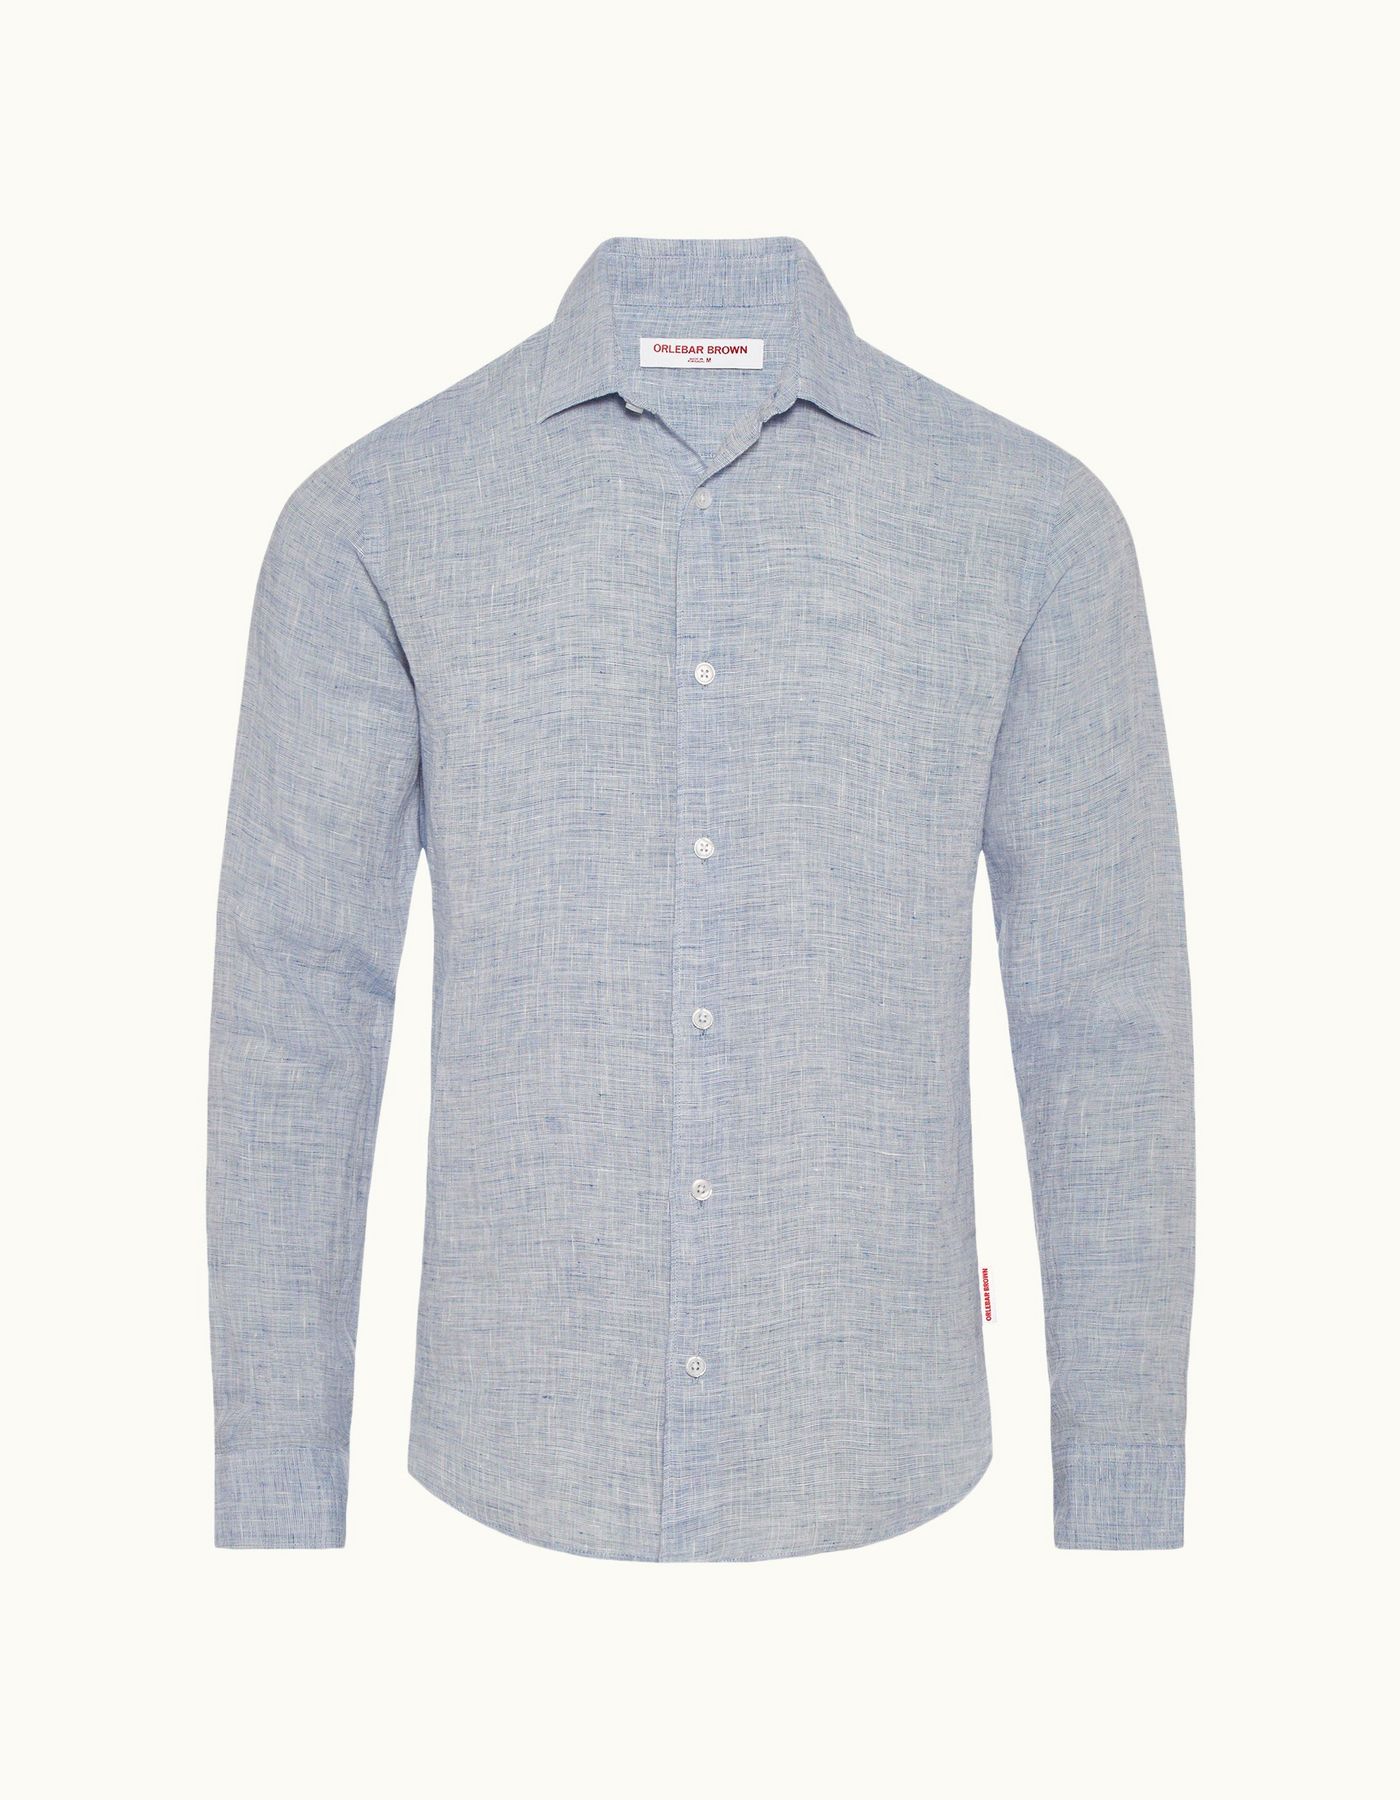 Giles Linen - Mens Navy/White Tailored-Fit Shirt